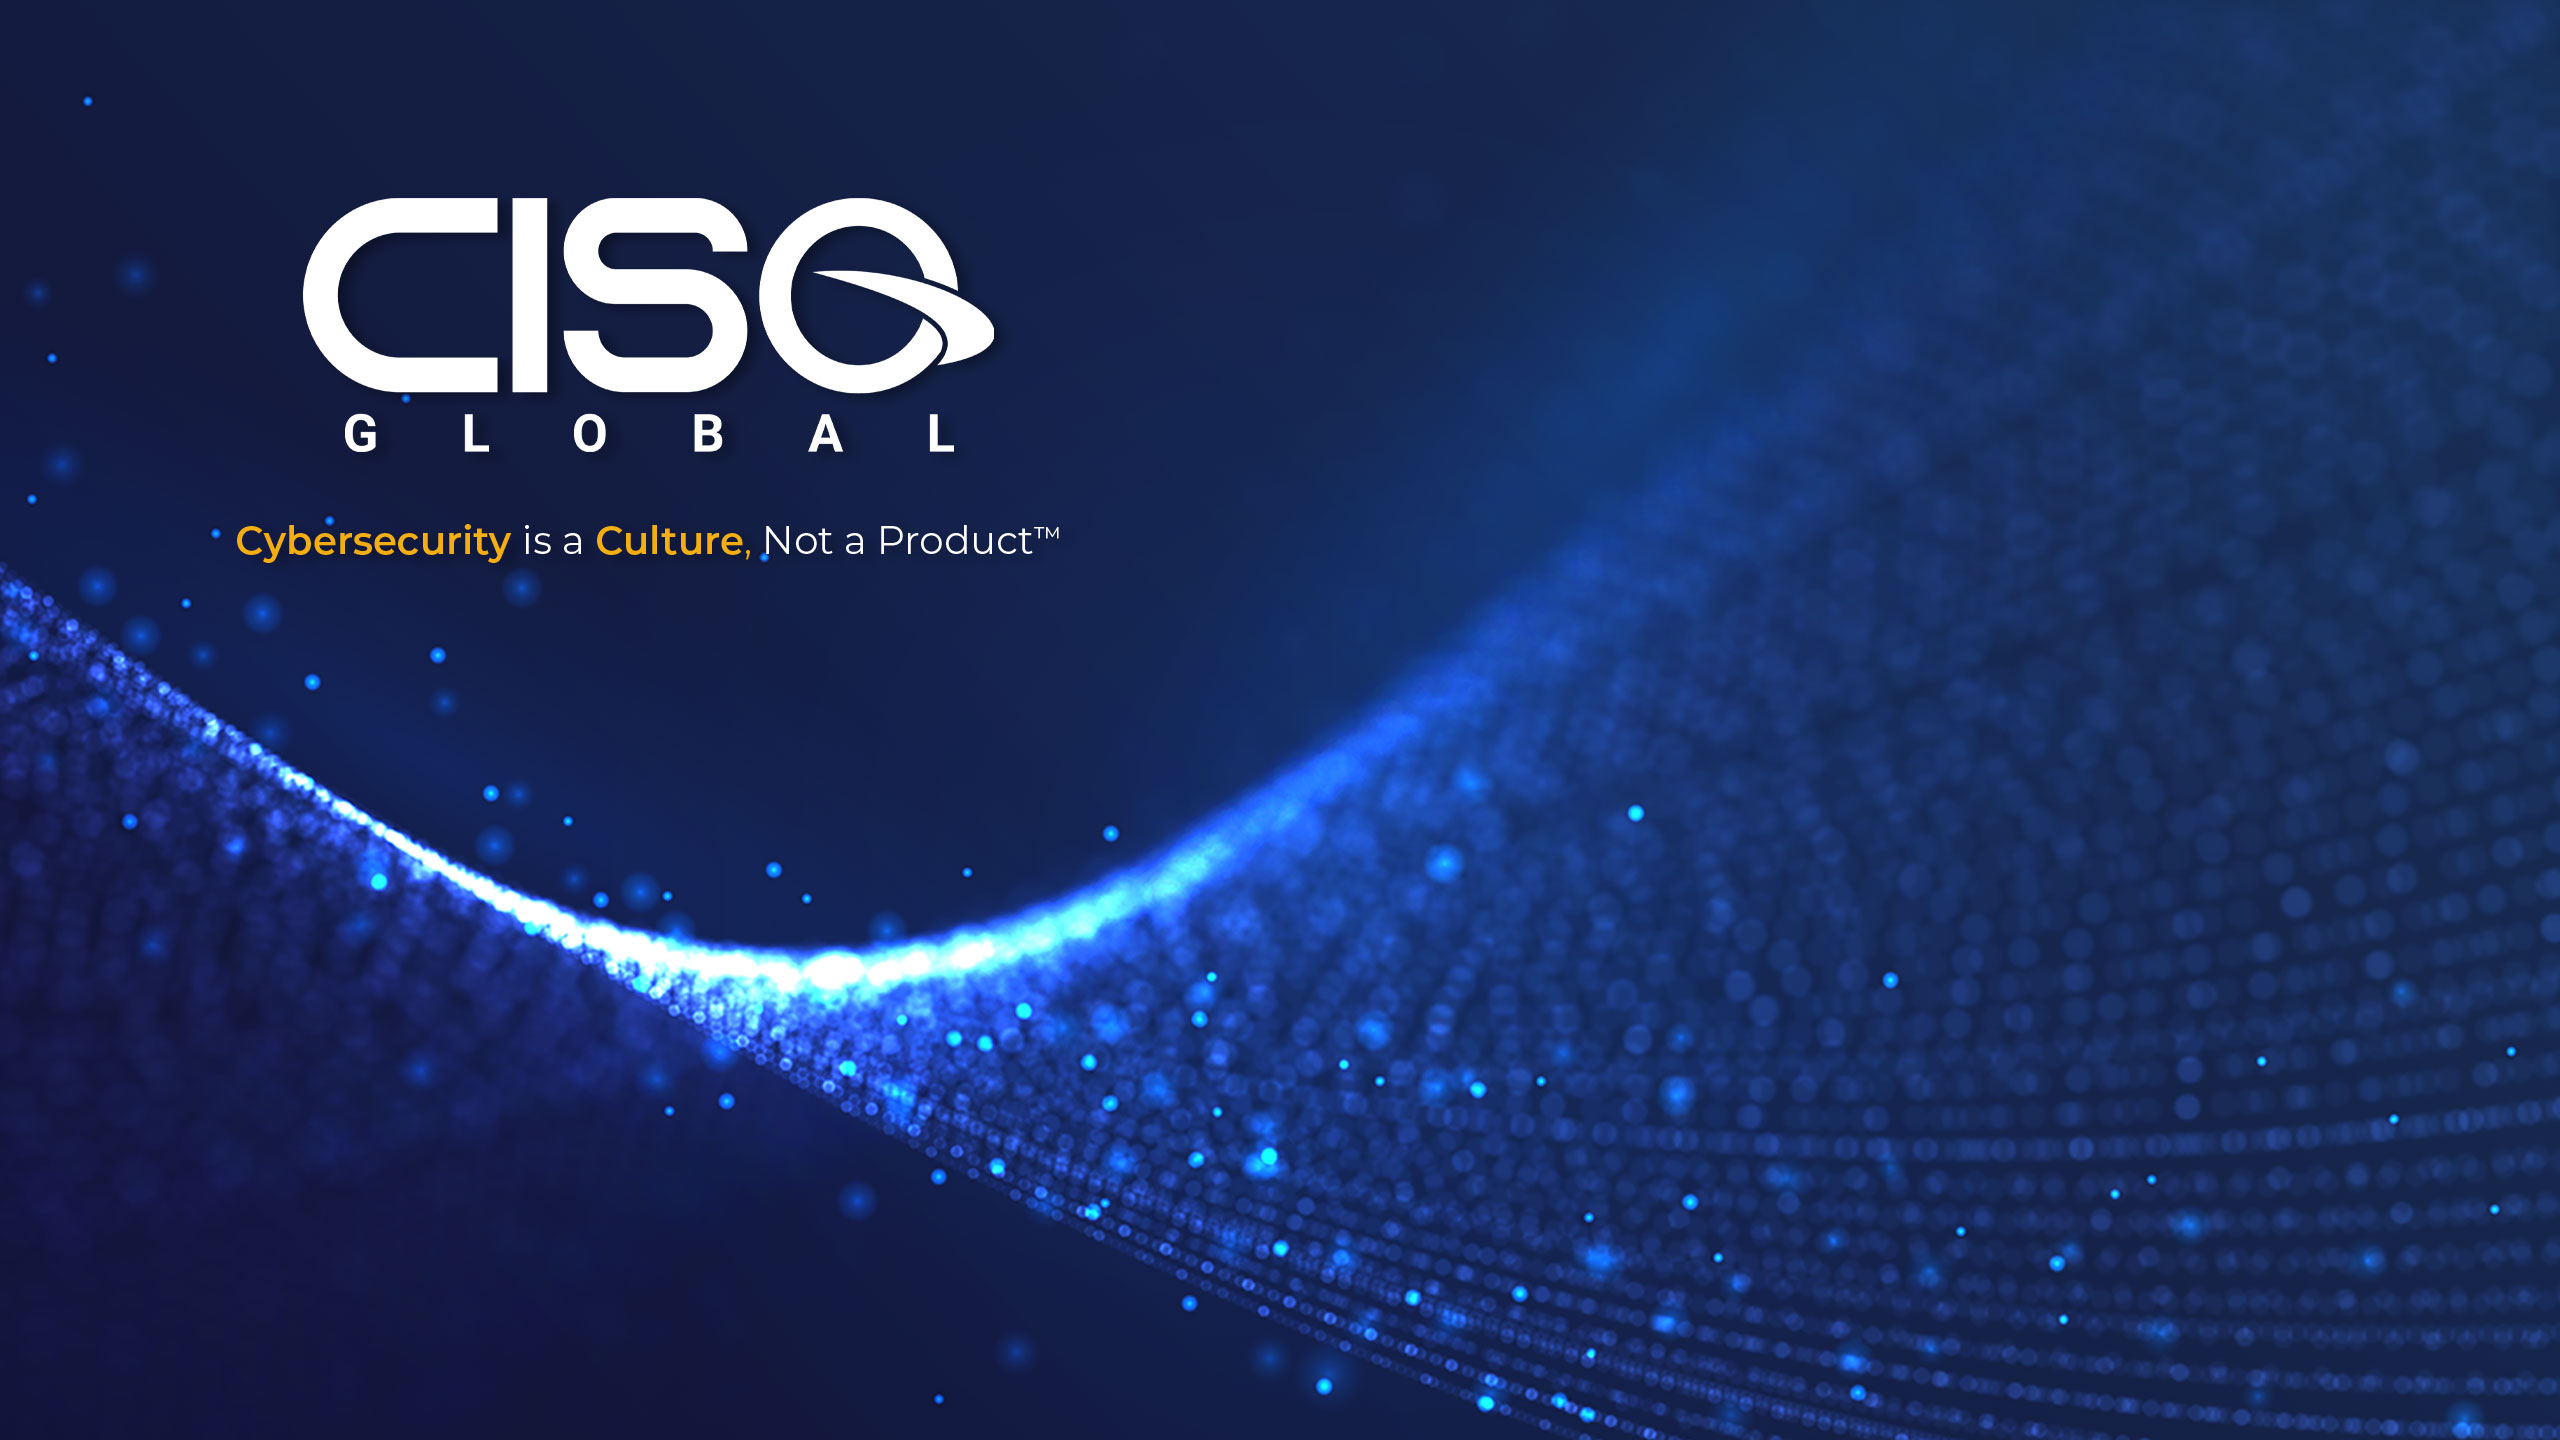 CISO Global Sells A Cybersecurity Culture, Not Just Products...Here's Why That Matters ($CISO)